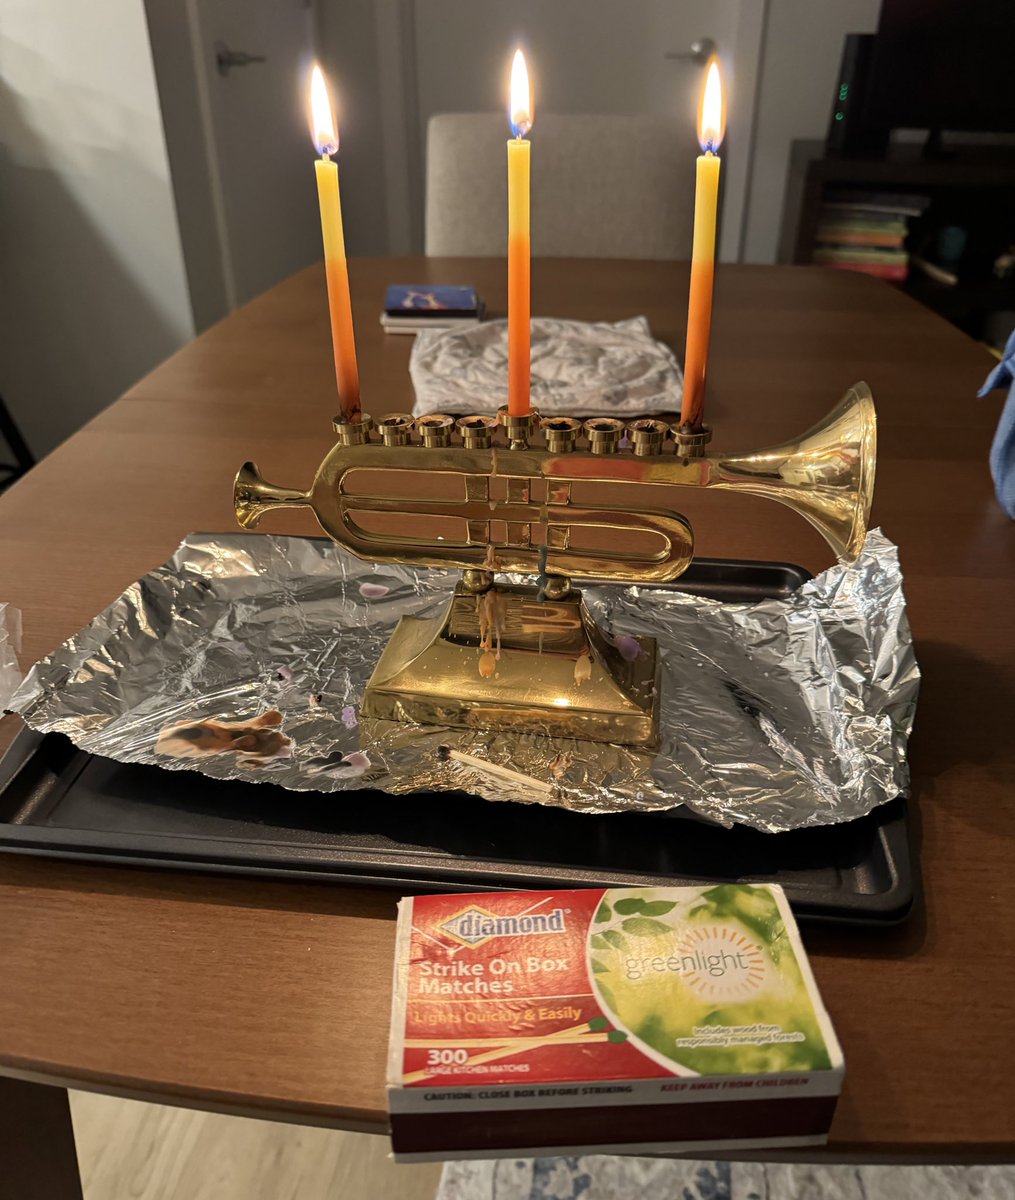 Insert joke about last year’s Chanukah candles miraculously lasting this year using some sort of resource-constrained eighth night approximation